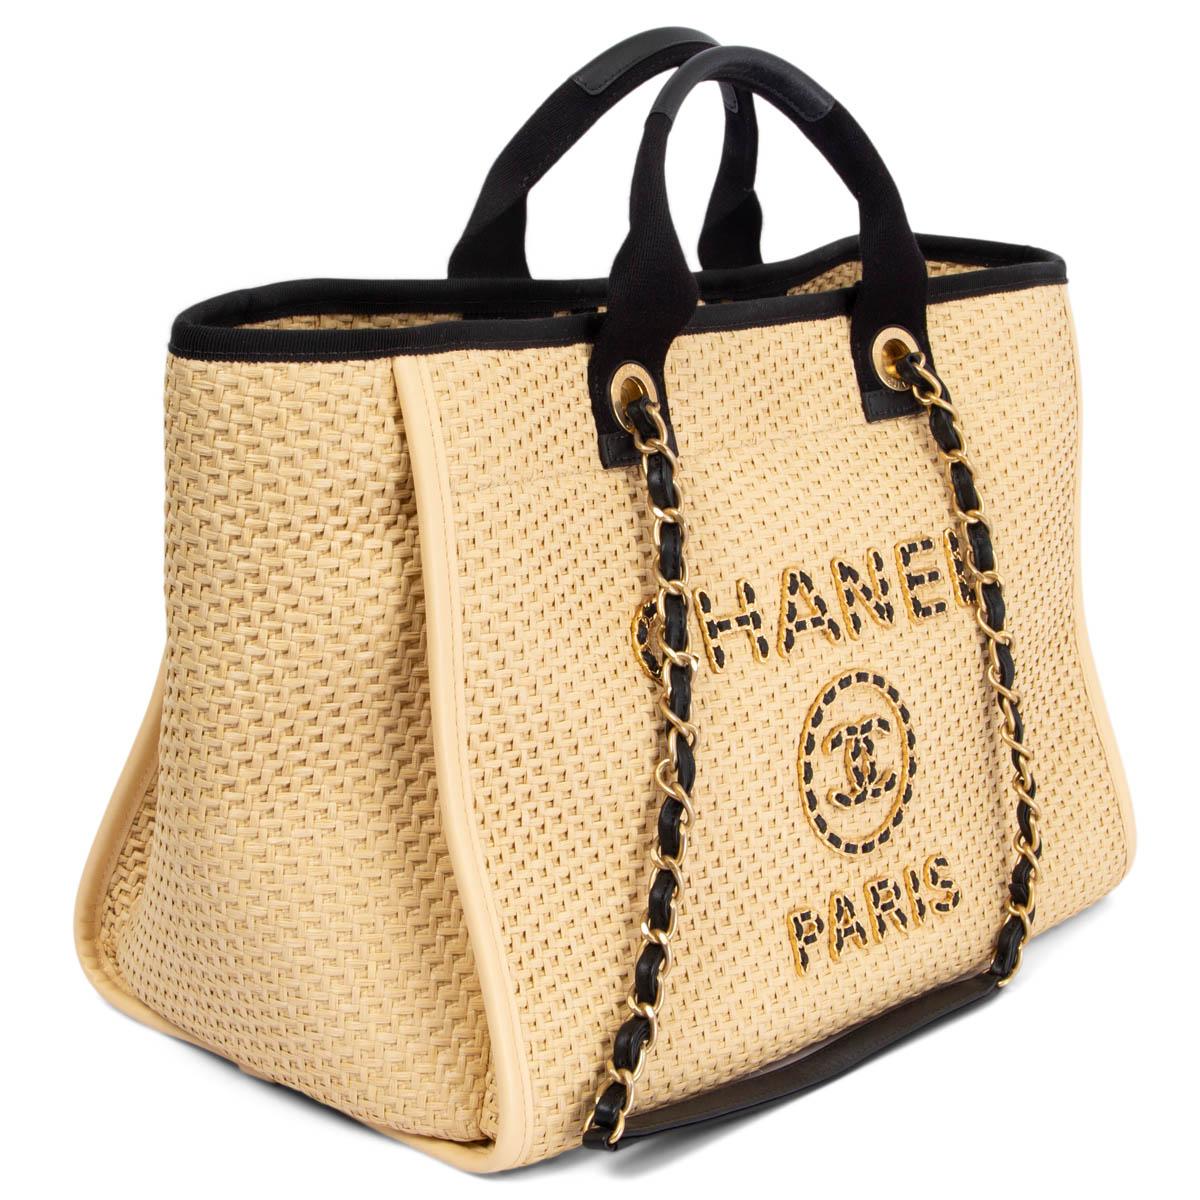 100% authentic Chanel Deauville Large shopping bag in natural beige woven raffia with black leather trimmings, grosgrain top edge and gold-tone hardware. The design features woven leather & metal chain logo appliqué on the front. Closes with a